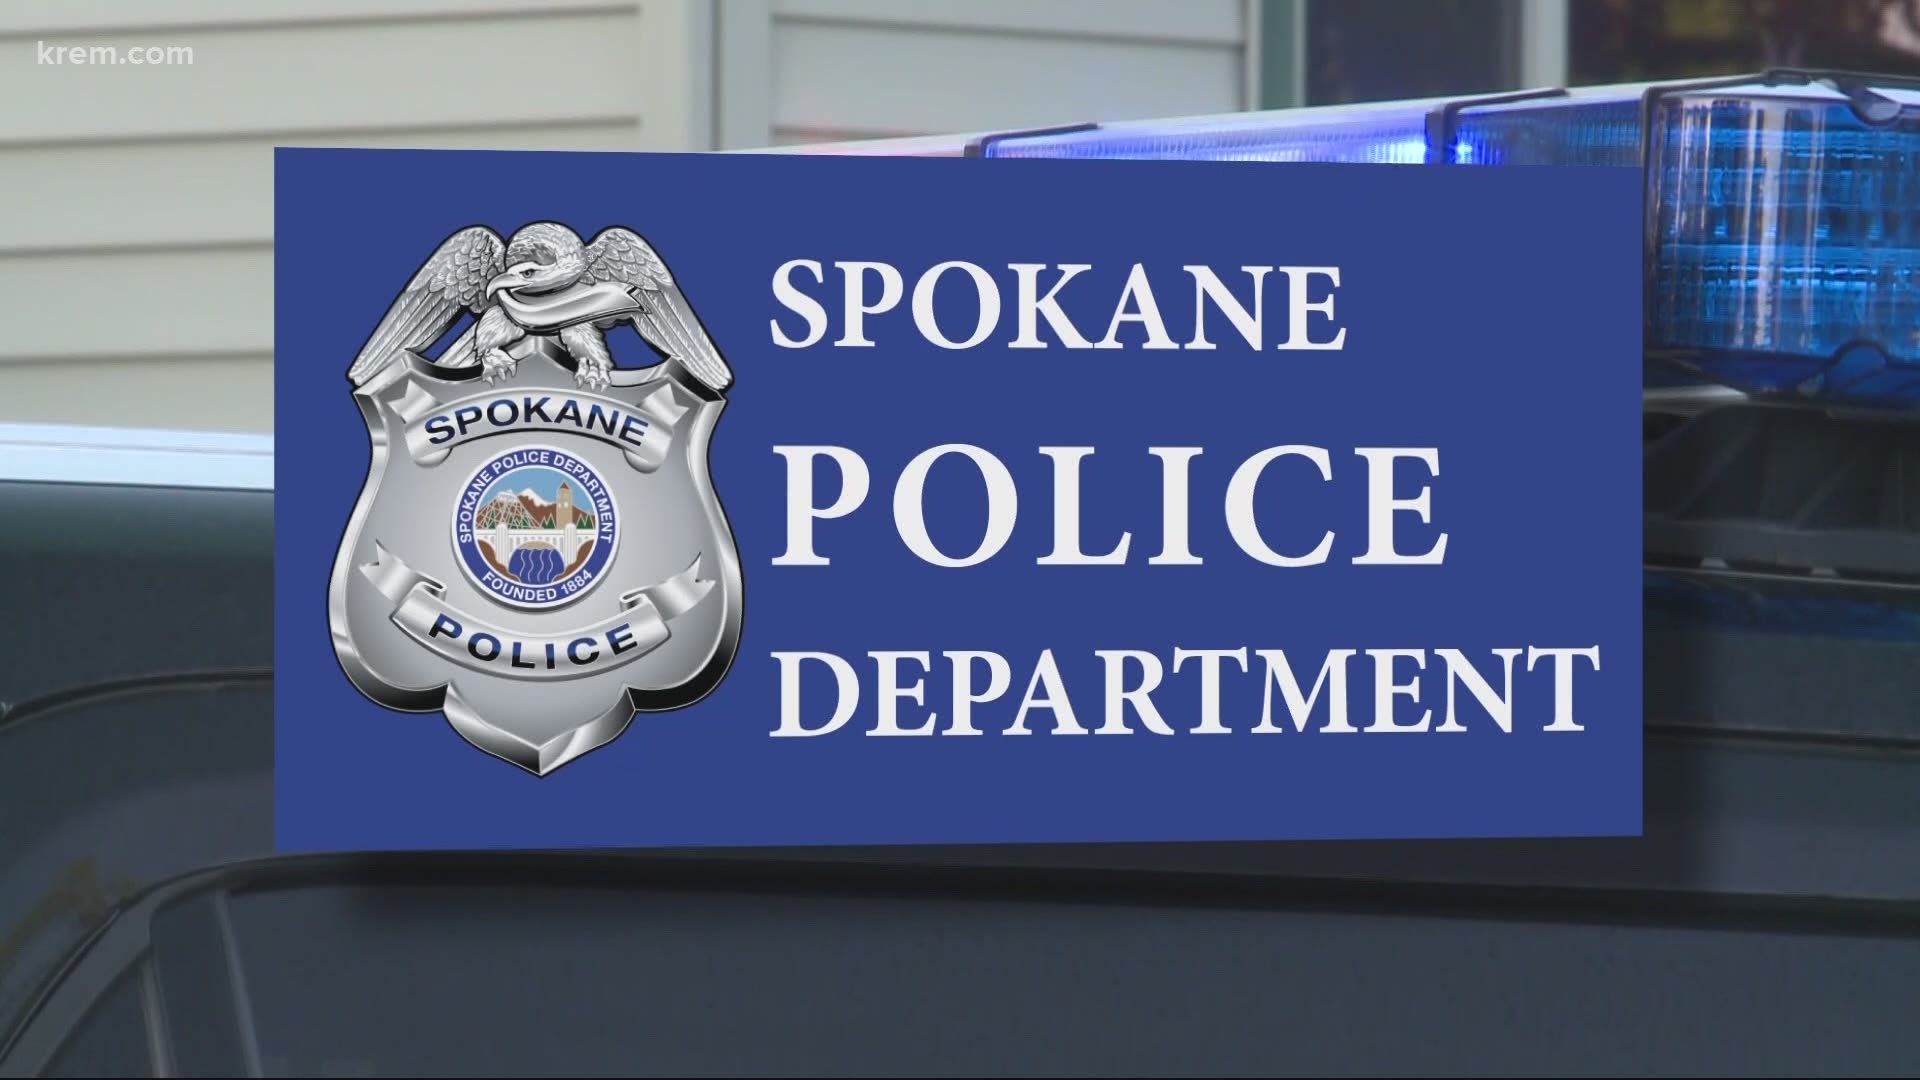 After the Spokane City Council unanimously rejected the proposed Spokane Police Guild contract, the deal will go back to mediation.